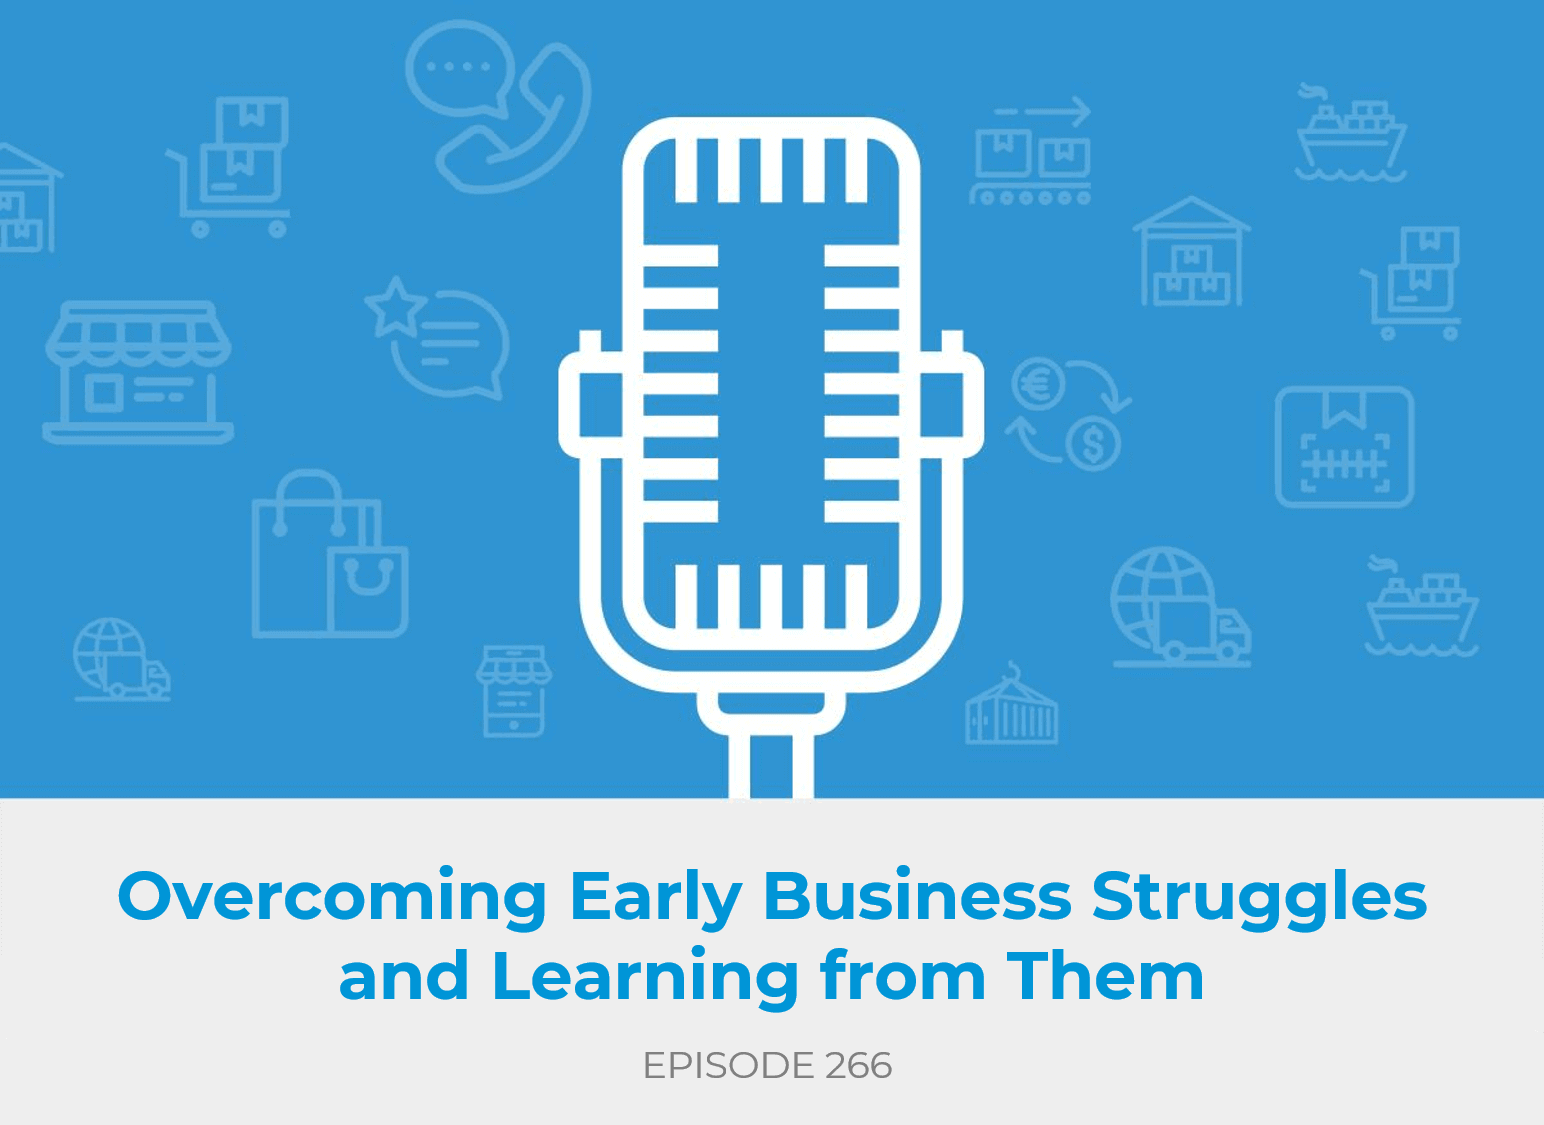 Overcoming Early Business Struggles and Learning from Them